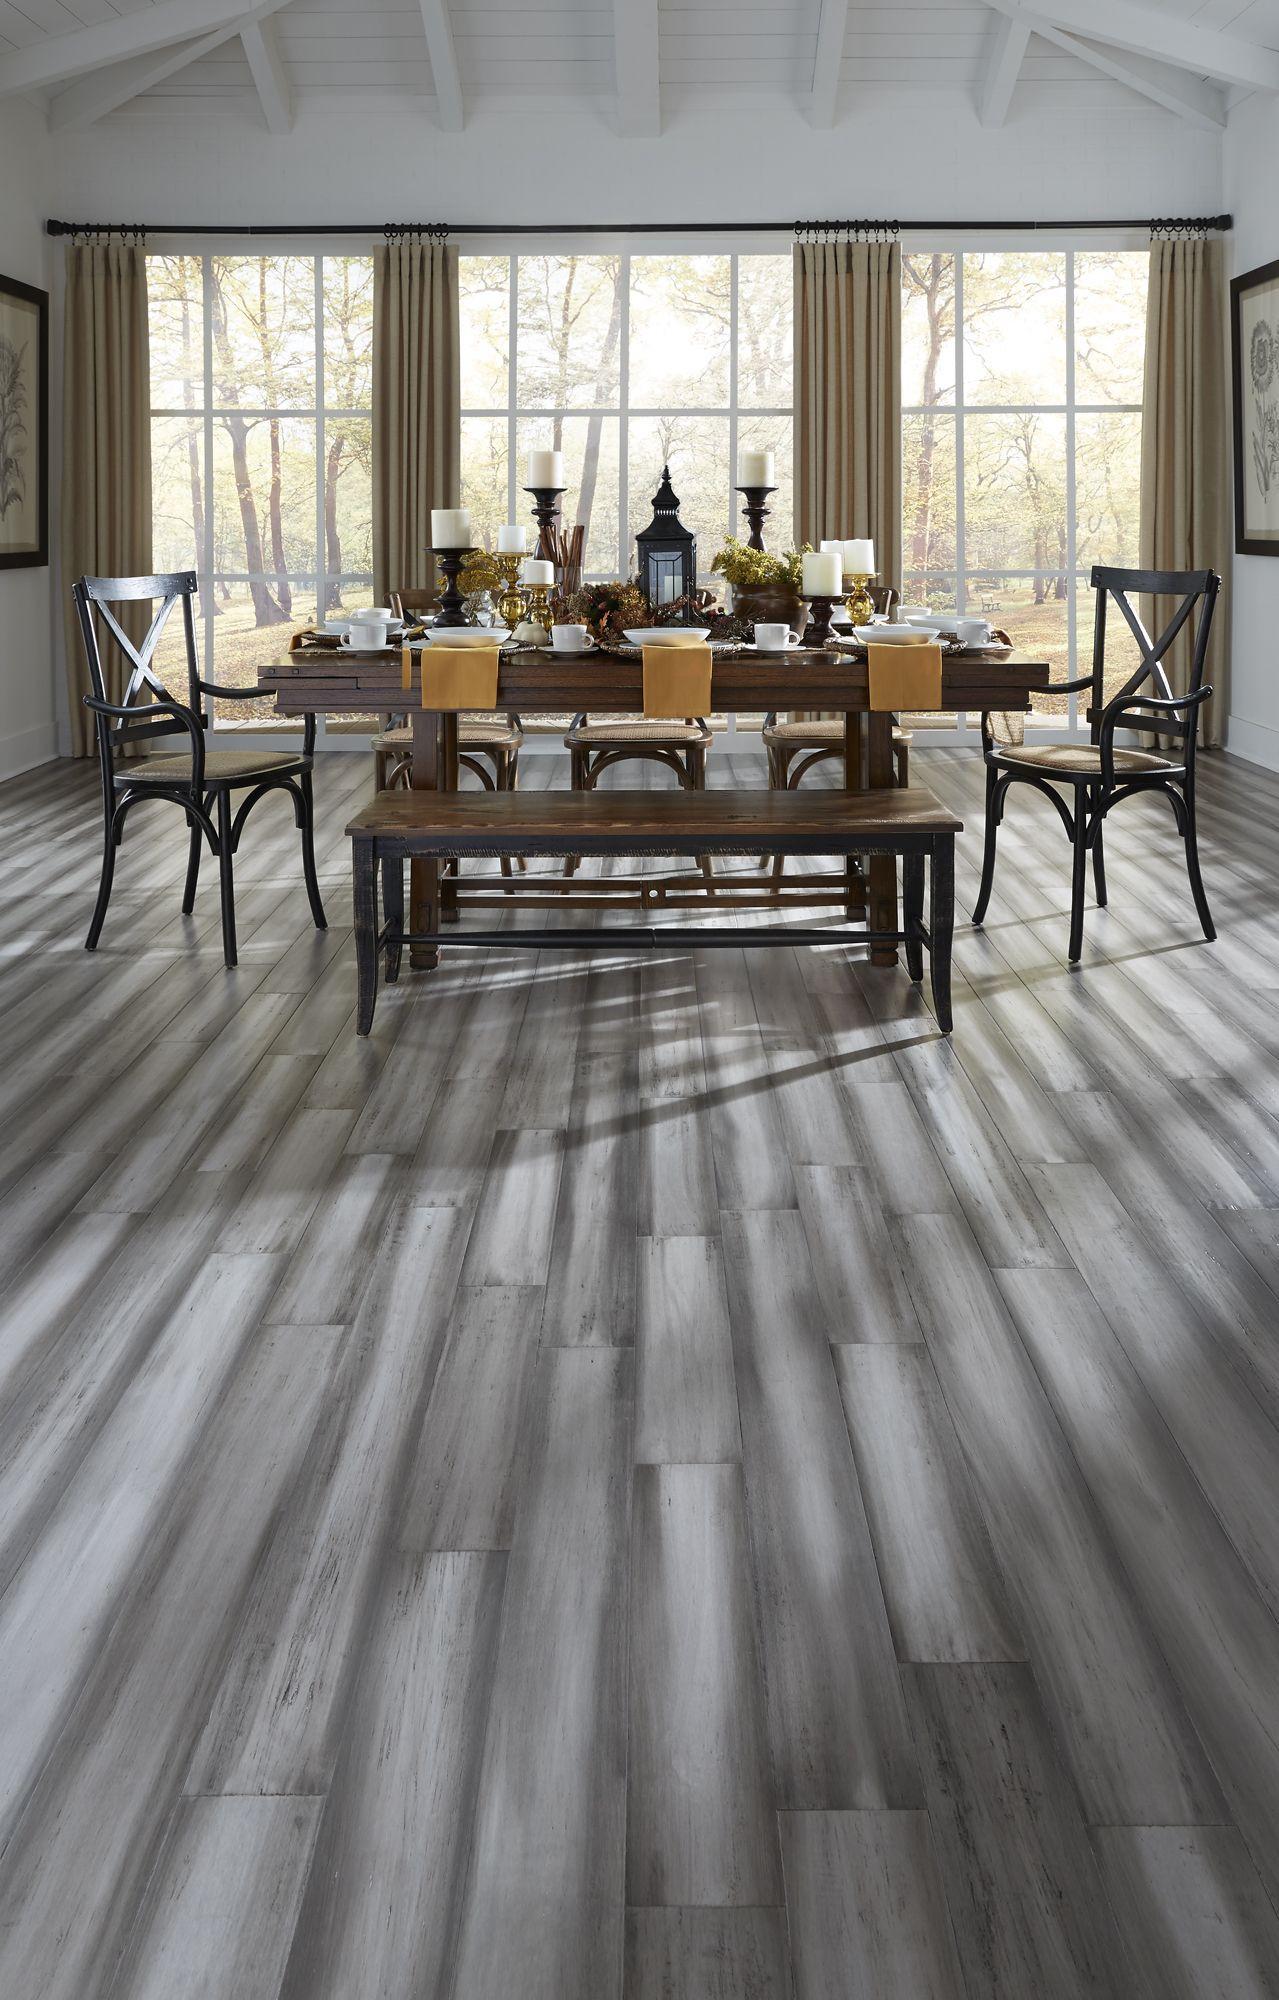 14 Unique Cost Of Bamboo Flooring Versus Hardwood 2024 free download cost of bamboo flooring versus hardwood of modern design and rustic texture pair perfectly with the stately with modern design and rustic texture pair perfectly with the stately blend of lig